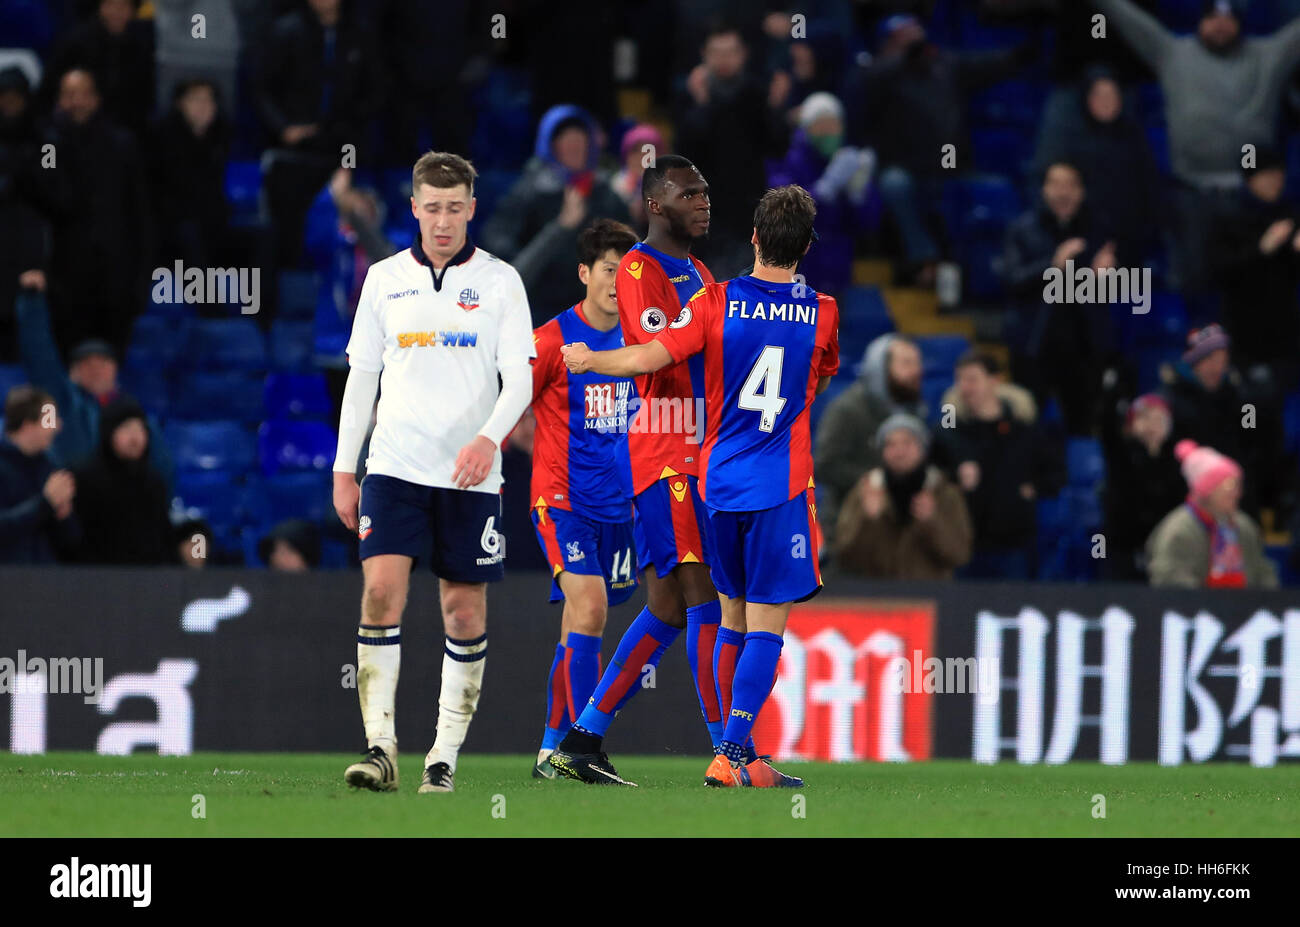 Crystal Palace's Christian Benteke celebrates scoring his side's second goal of the game as Bolton Wanderers' Josh Vela stands dejected during the Emirates FA Cup, third round replay match at Selhurst Park, London. Stock Photo